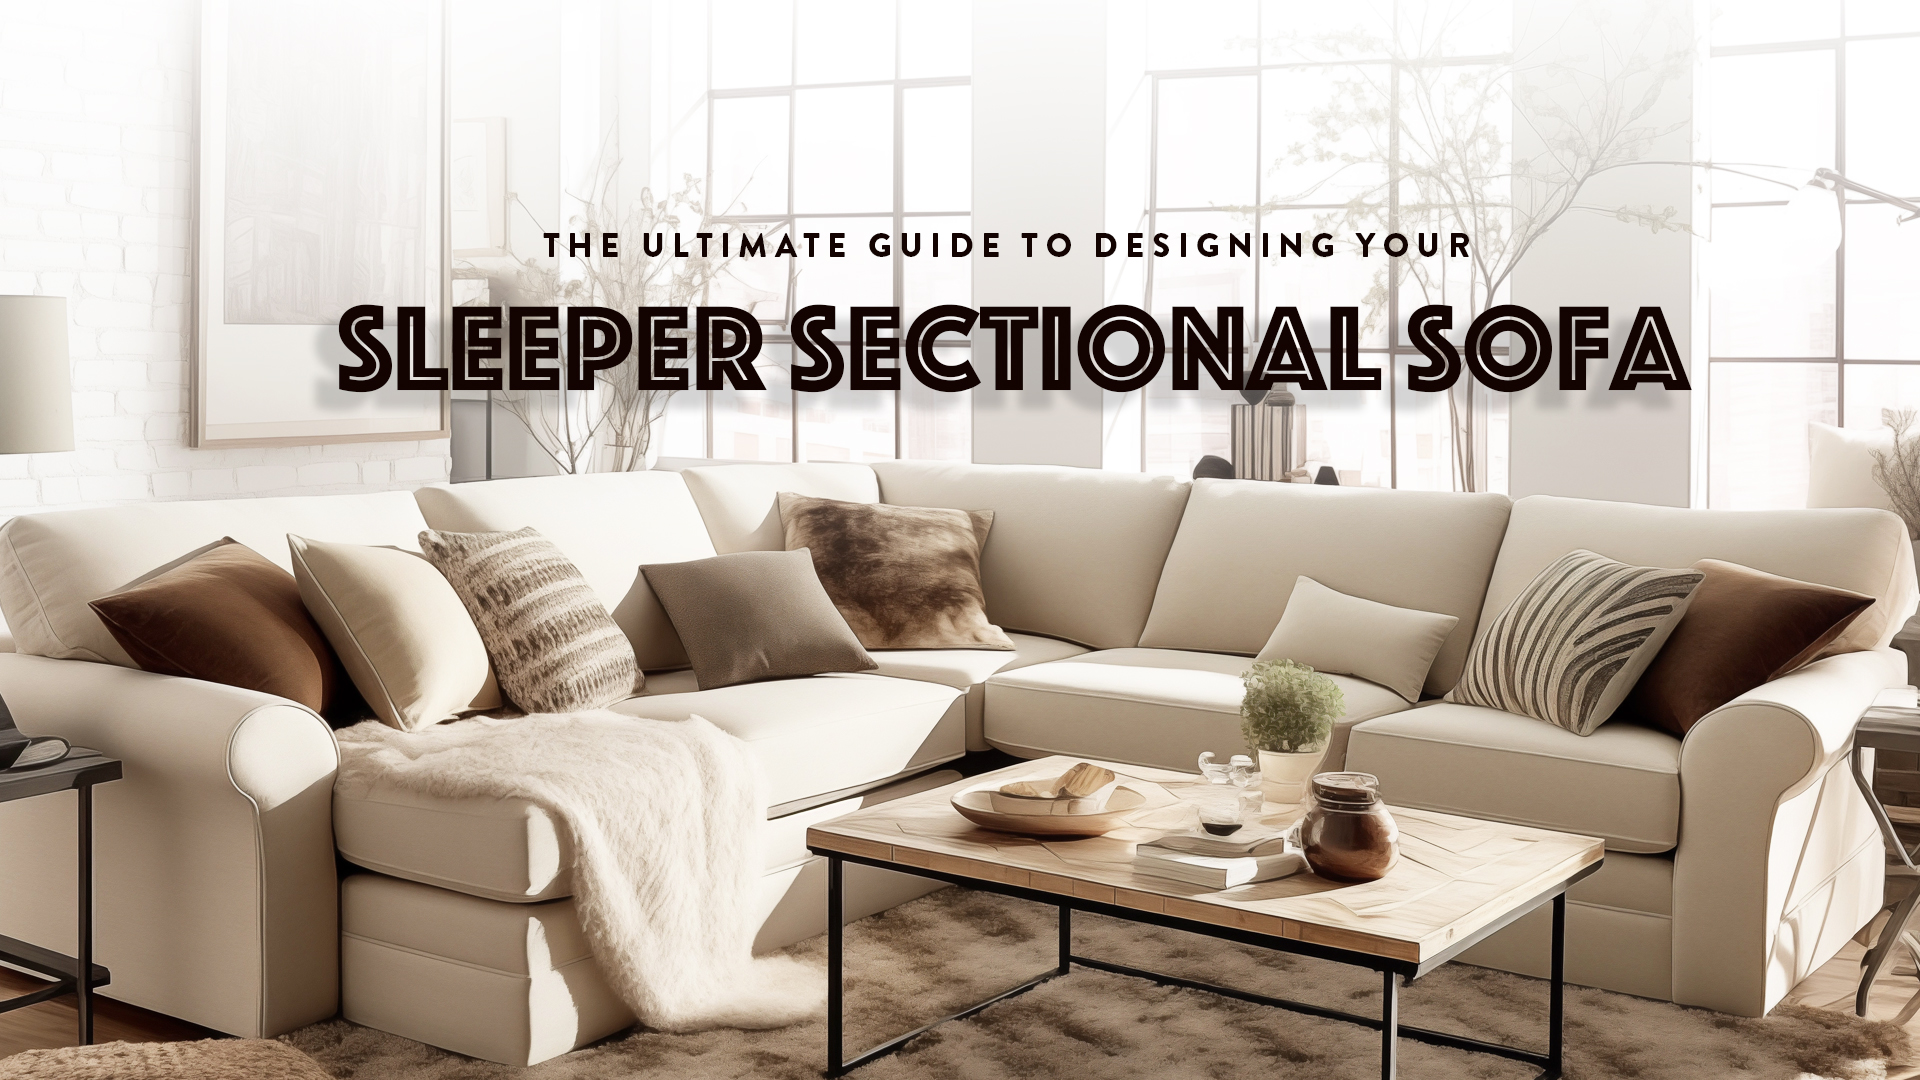 The Ultimate Guide to designing your Sleeper Sectional Sofa